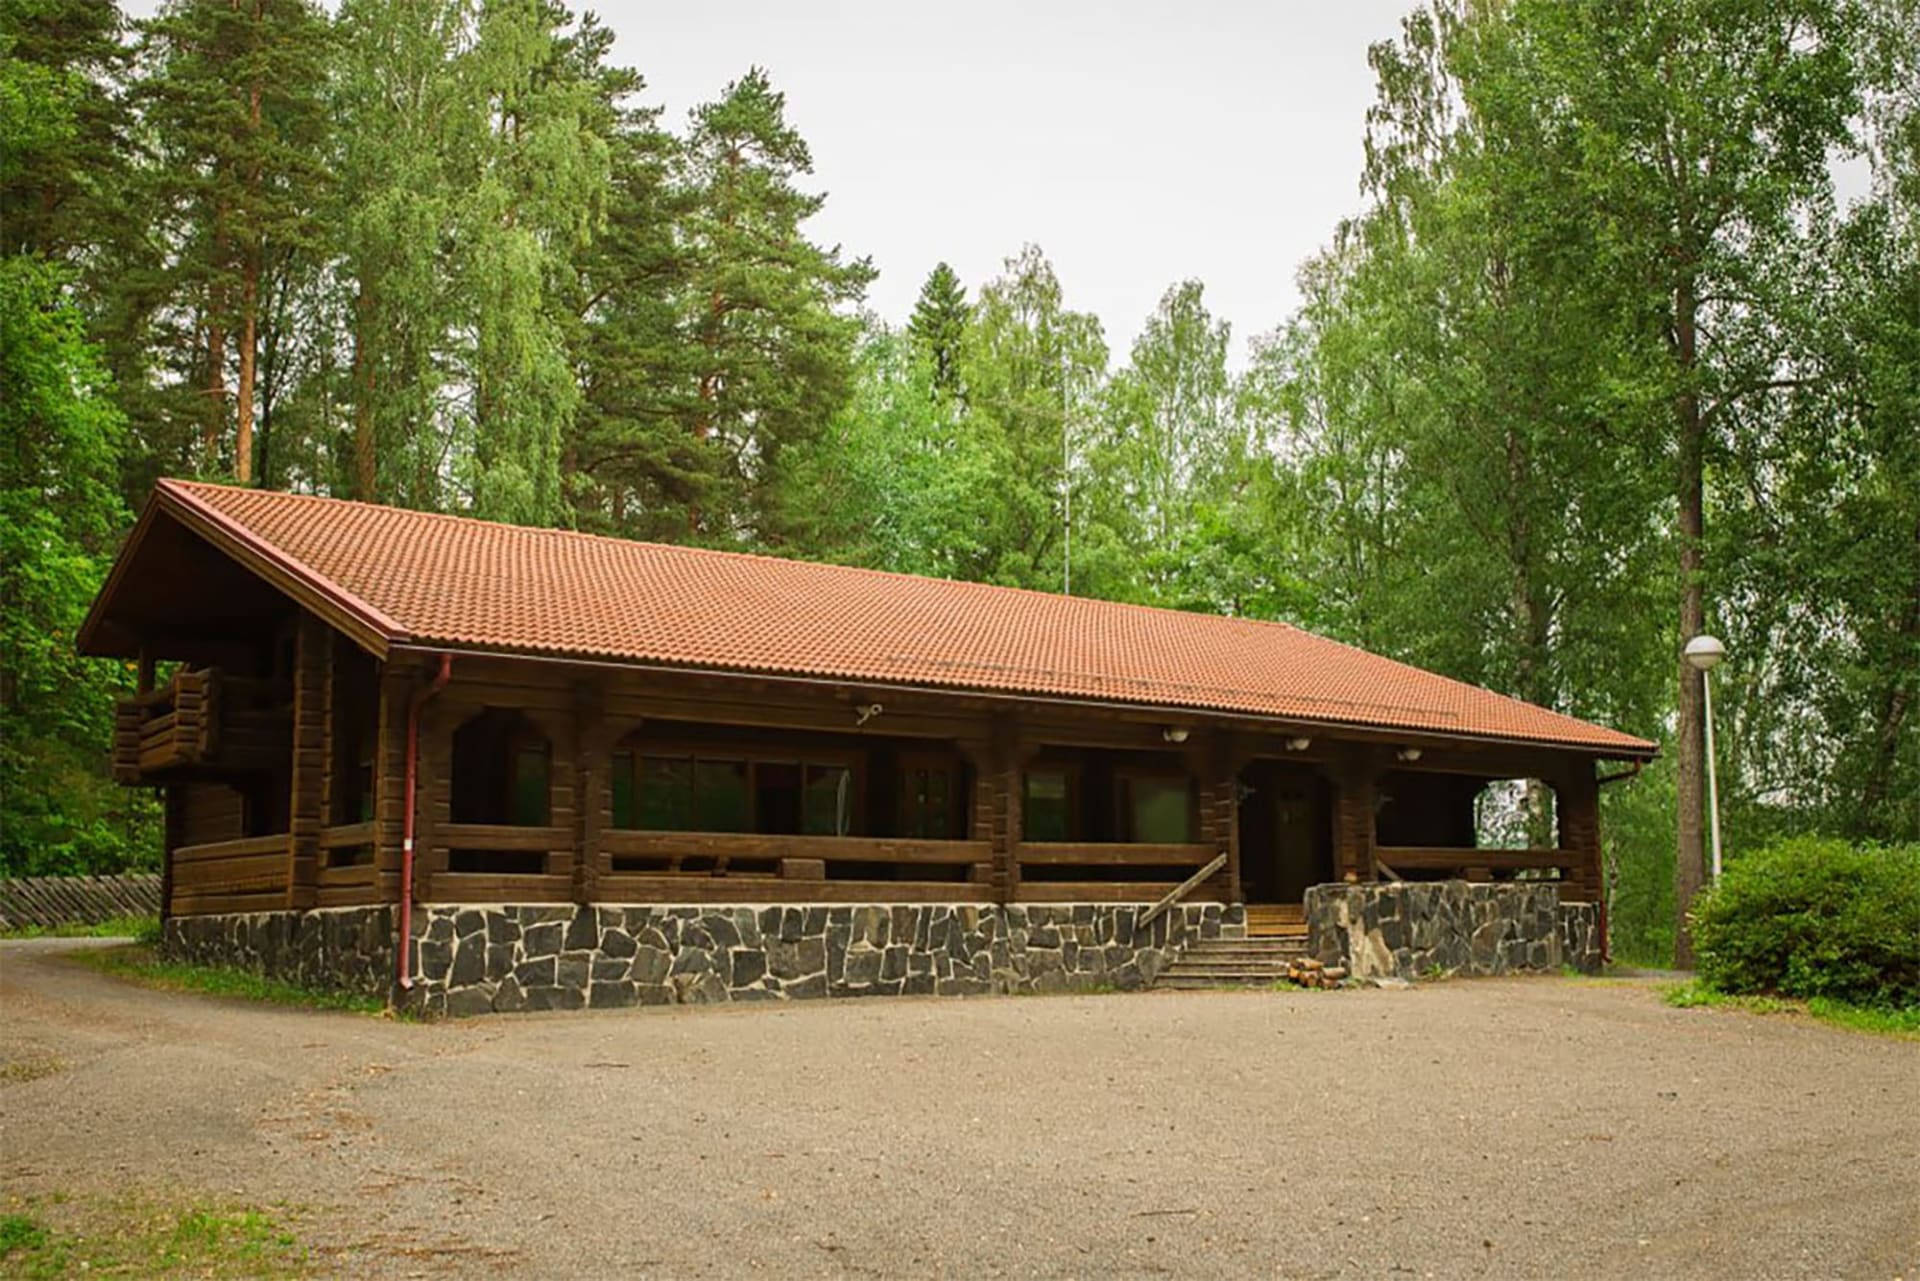 Lake Cafe is located in Aulanko Nature Activity Center